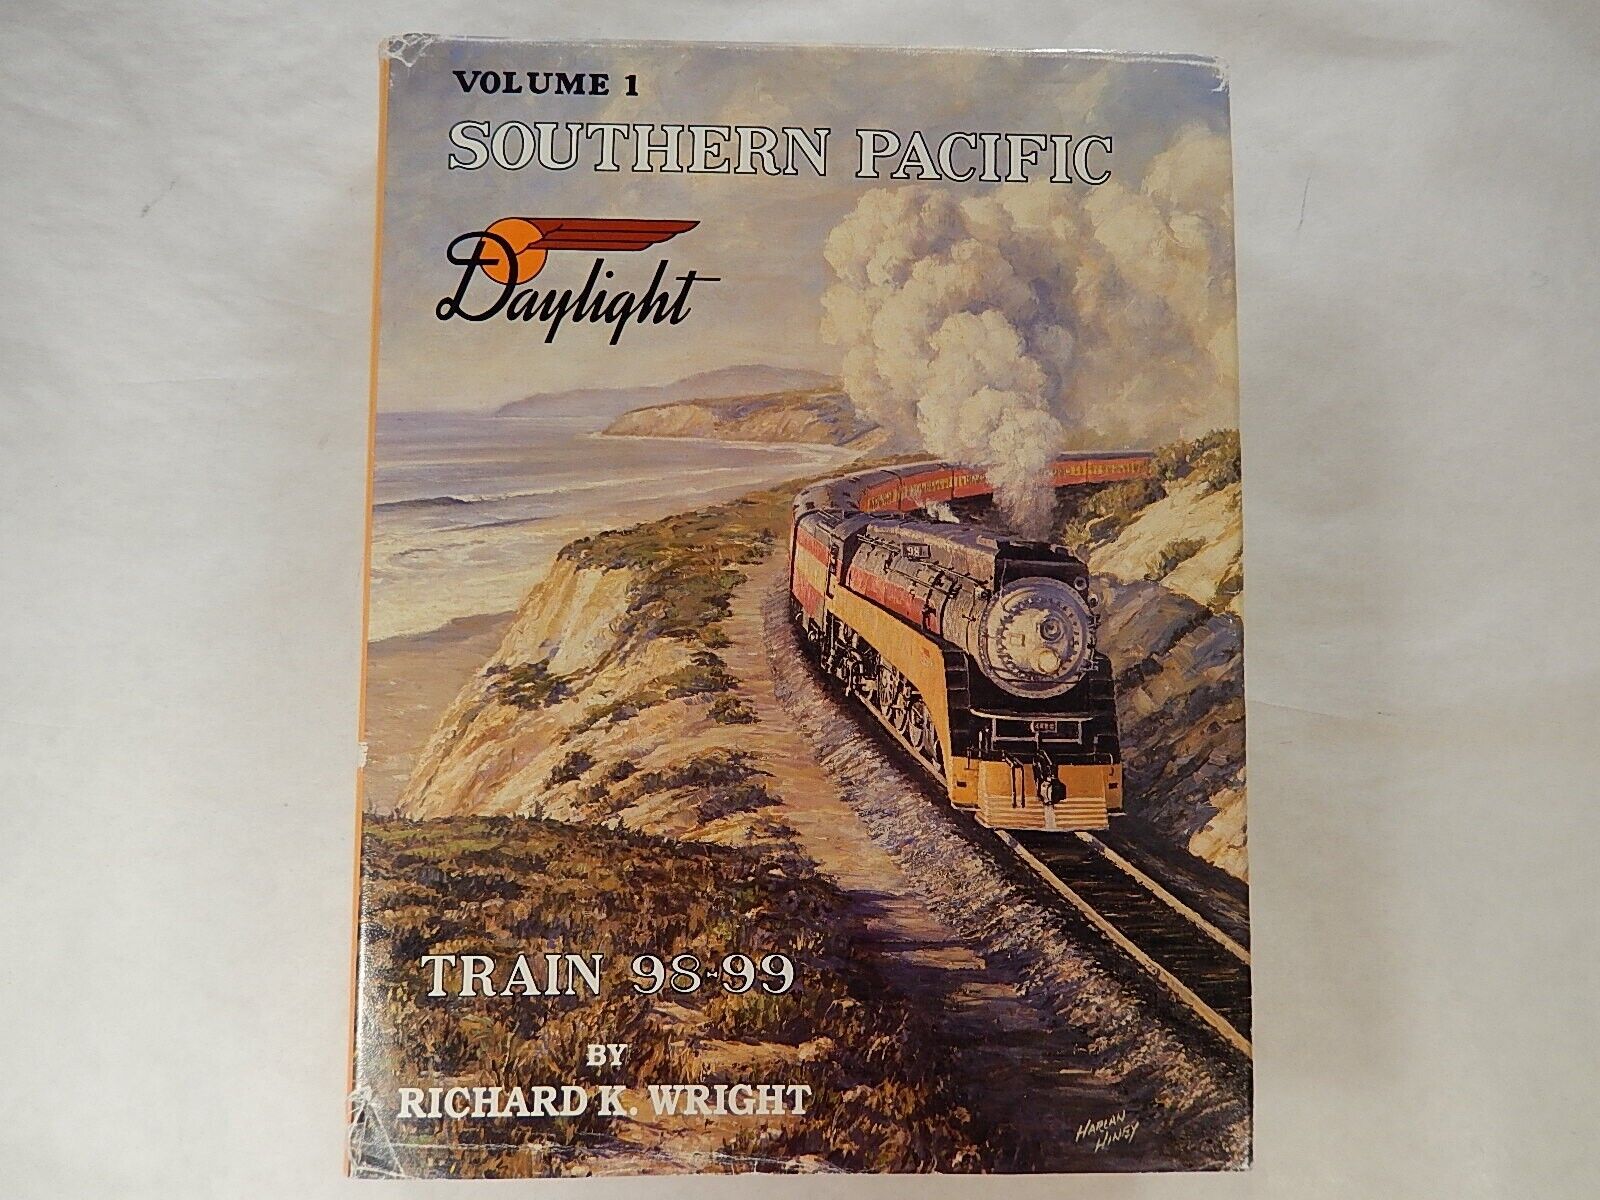 Southern Pacific Daylight: Train 98-99 by Richard K. Wright, 1986, SIGNED, VG+